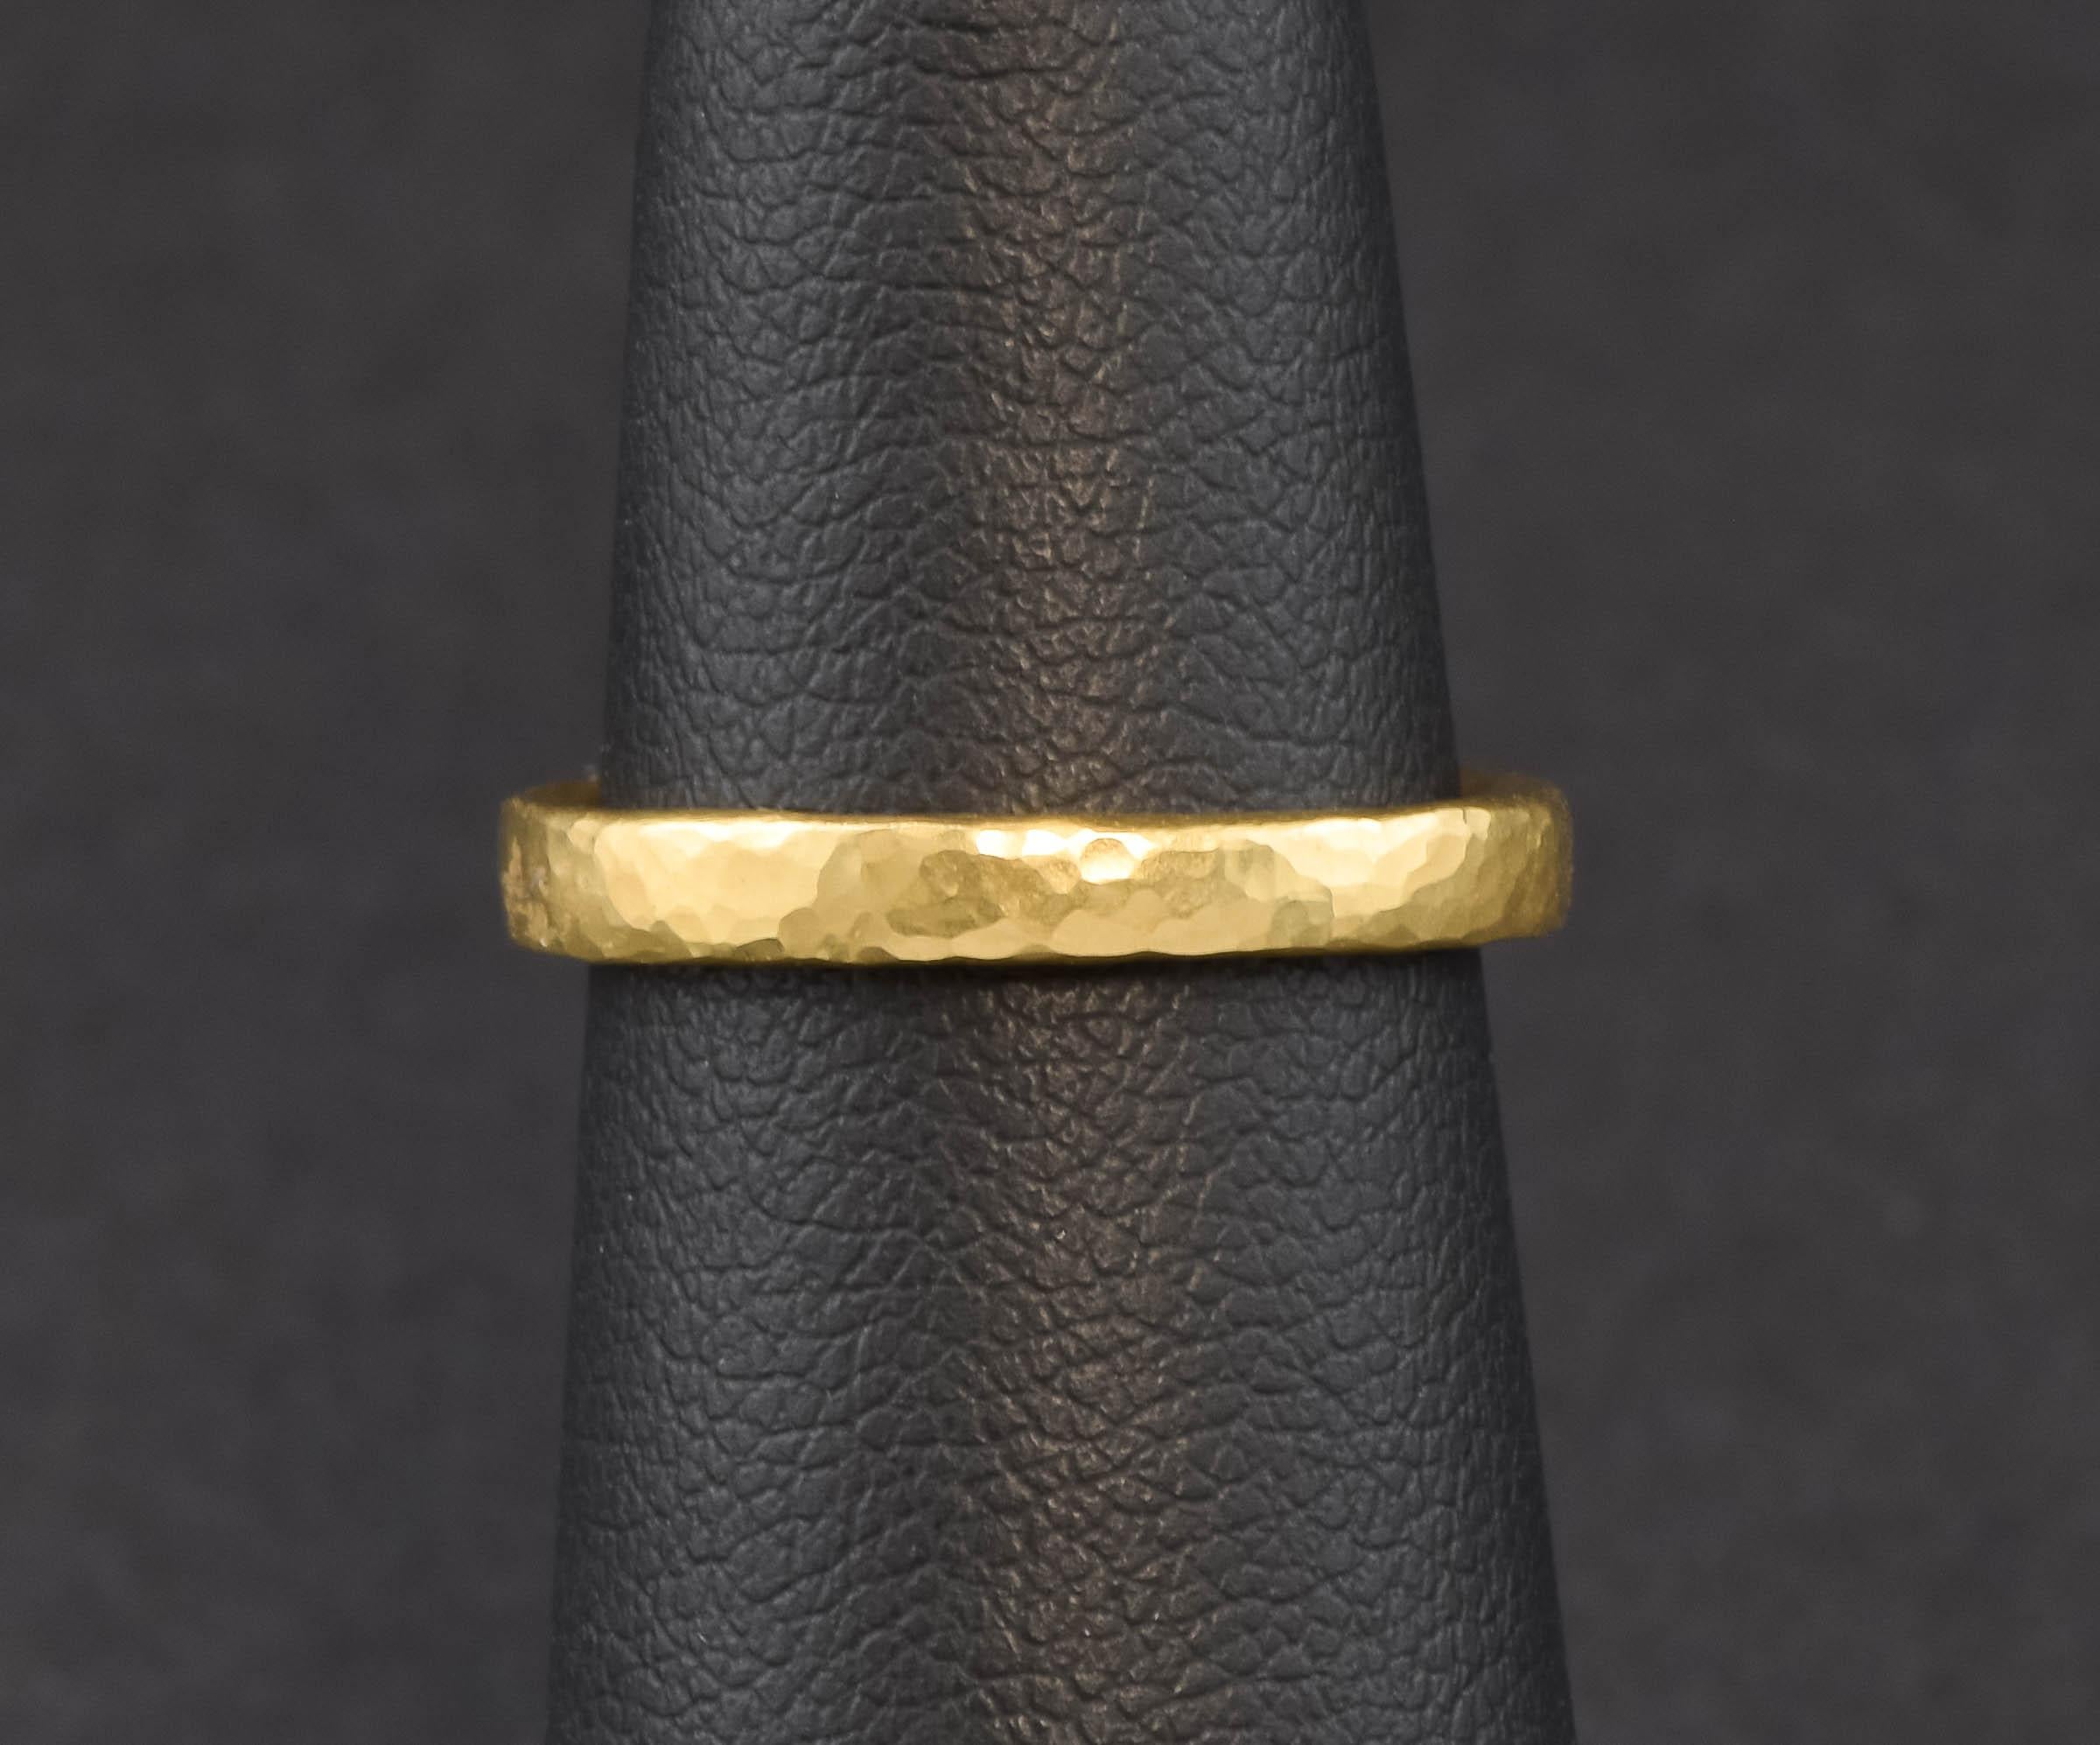 I'm pleased to offer another luxurious 22K gold band - this one with a delightful hand hammered finish that catches the light so prettily.

Crafted of solid 22K gold (still marked inside), the band has a rich, organic feel to it and a very nice